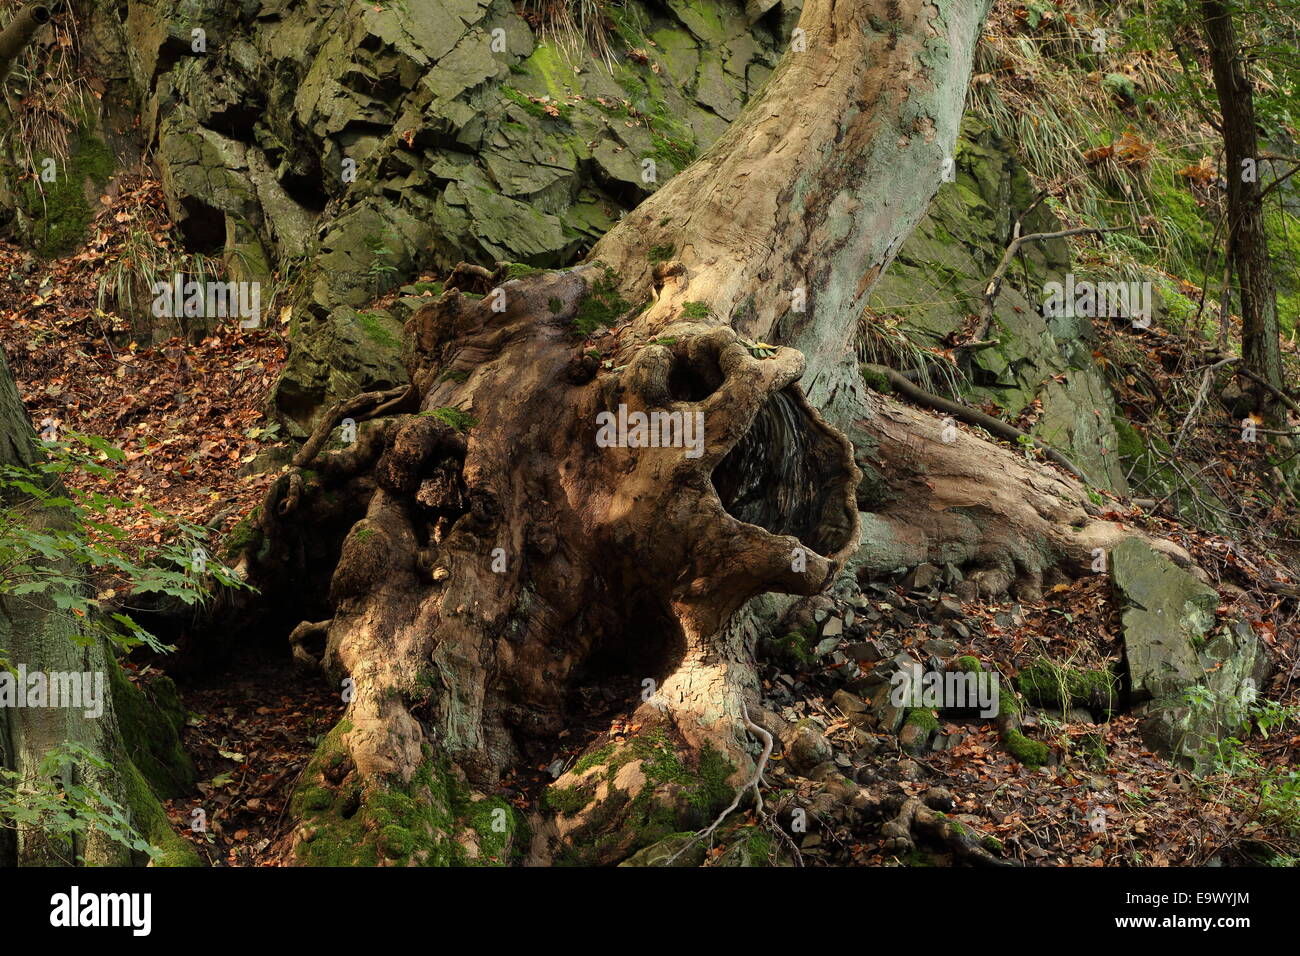 An old tree in the Harz Mountains In Germany, which looks a bit like a mythical creature in the forest. Stock Photo